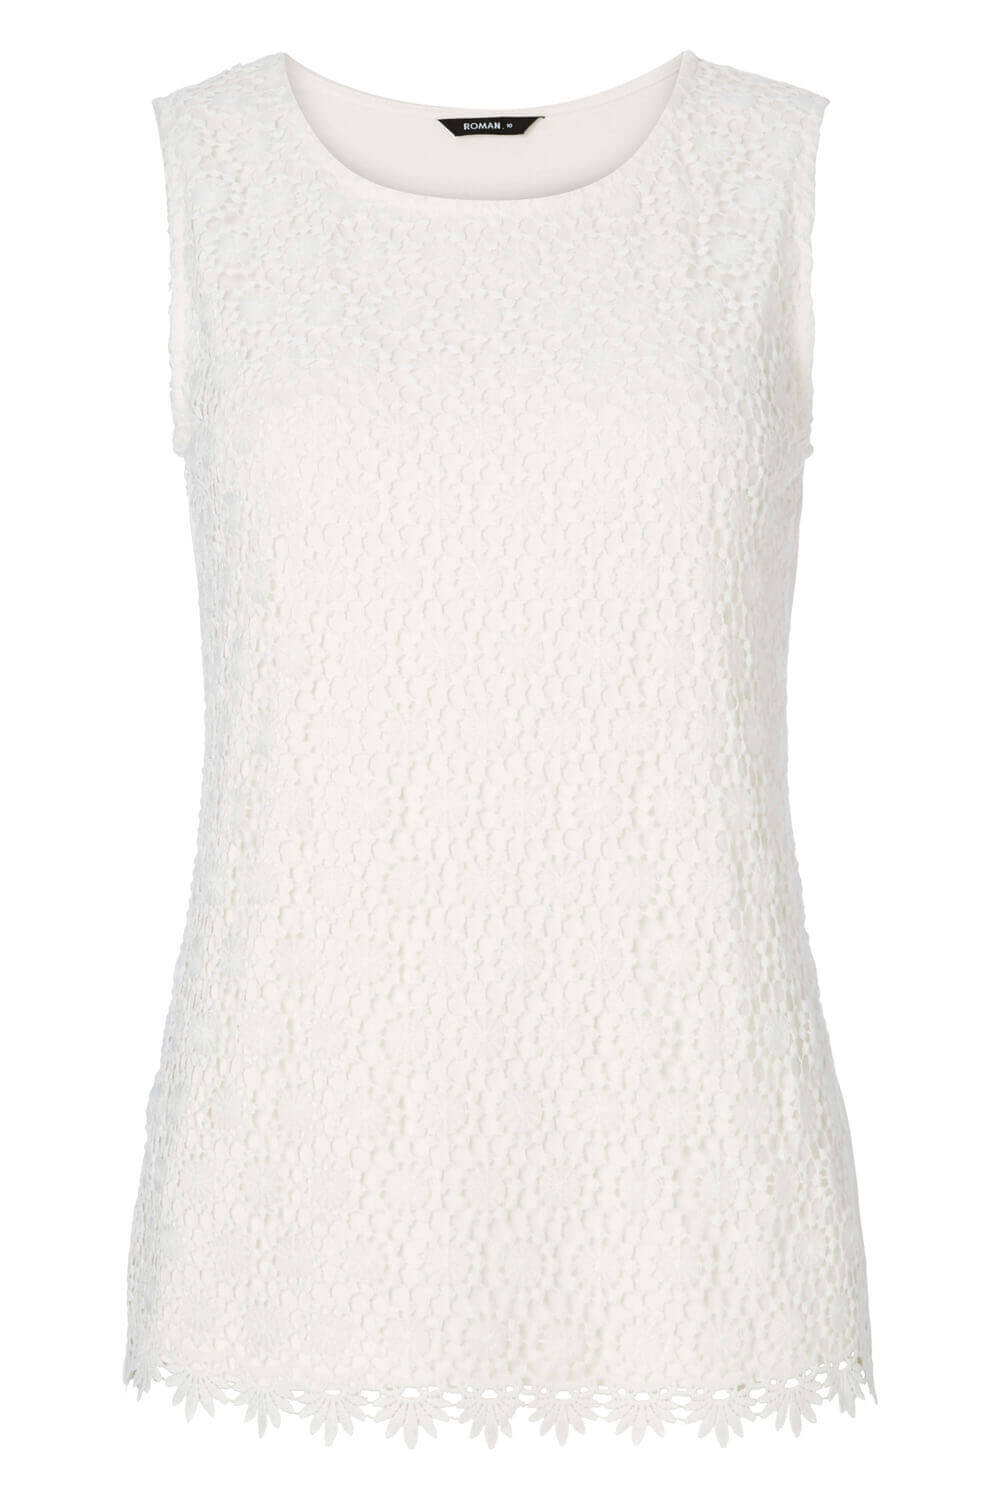 Ivory  Lace Jersey Top, Image 4 of 8